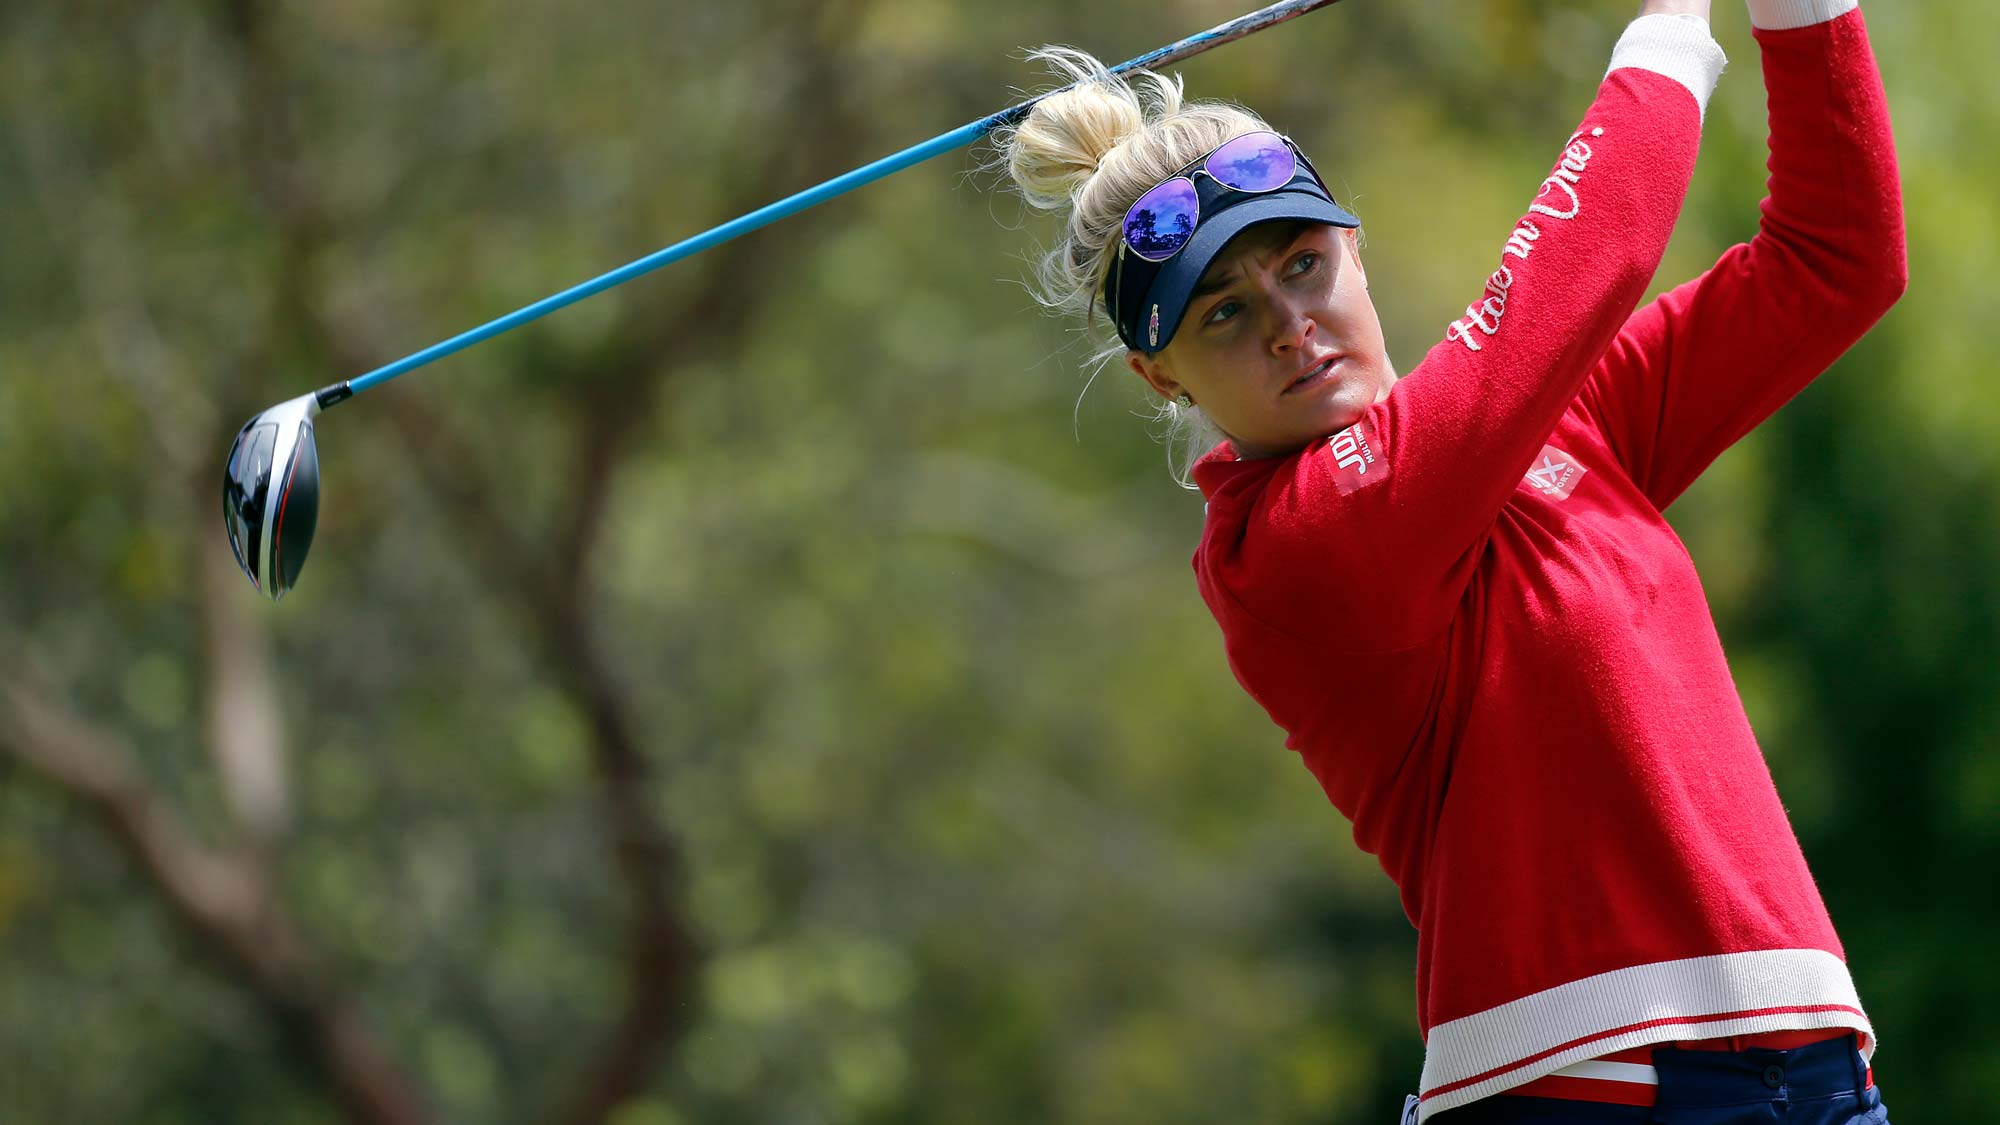 Charley Hull of England hits on the 2nd hole during the third round of the LPGA Mediheal Championship